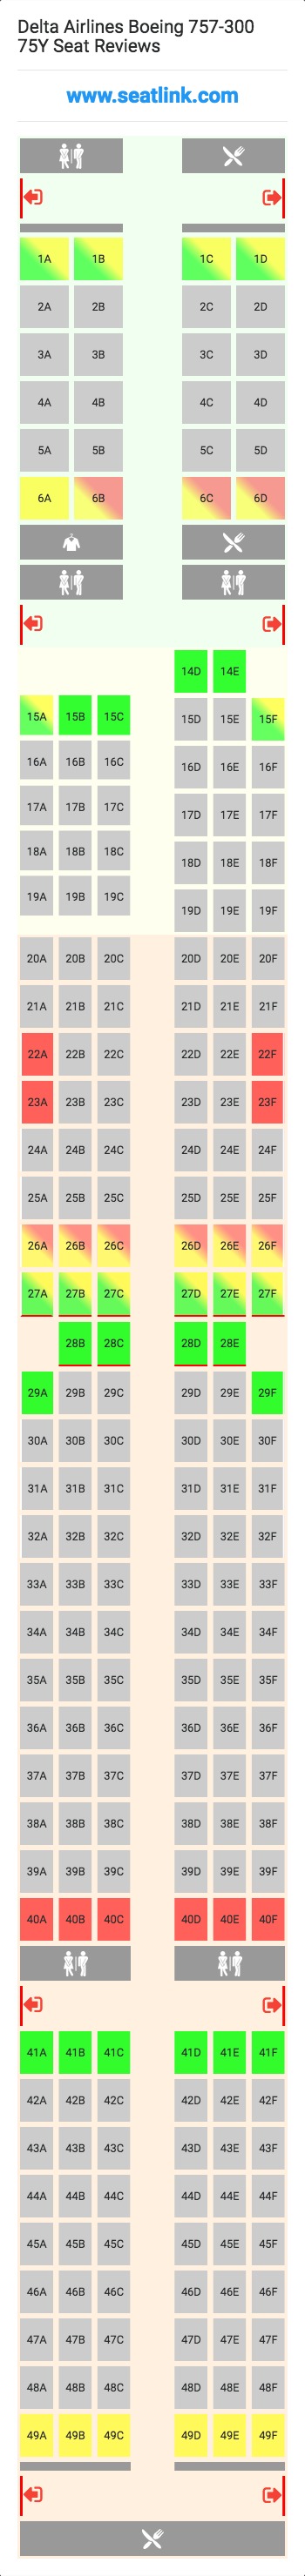 Delta Airlines Boeing 757-300 75Y (753) Seat Map